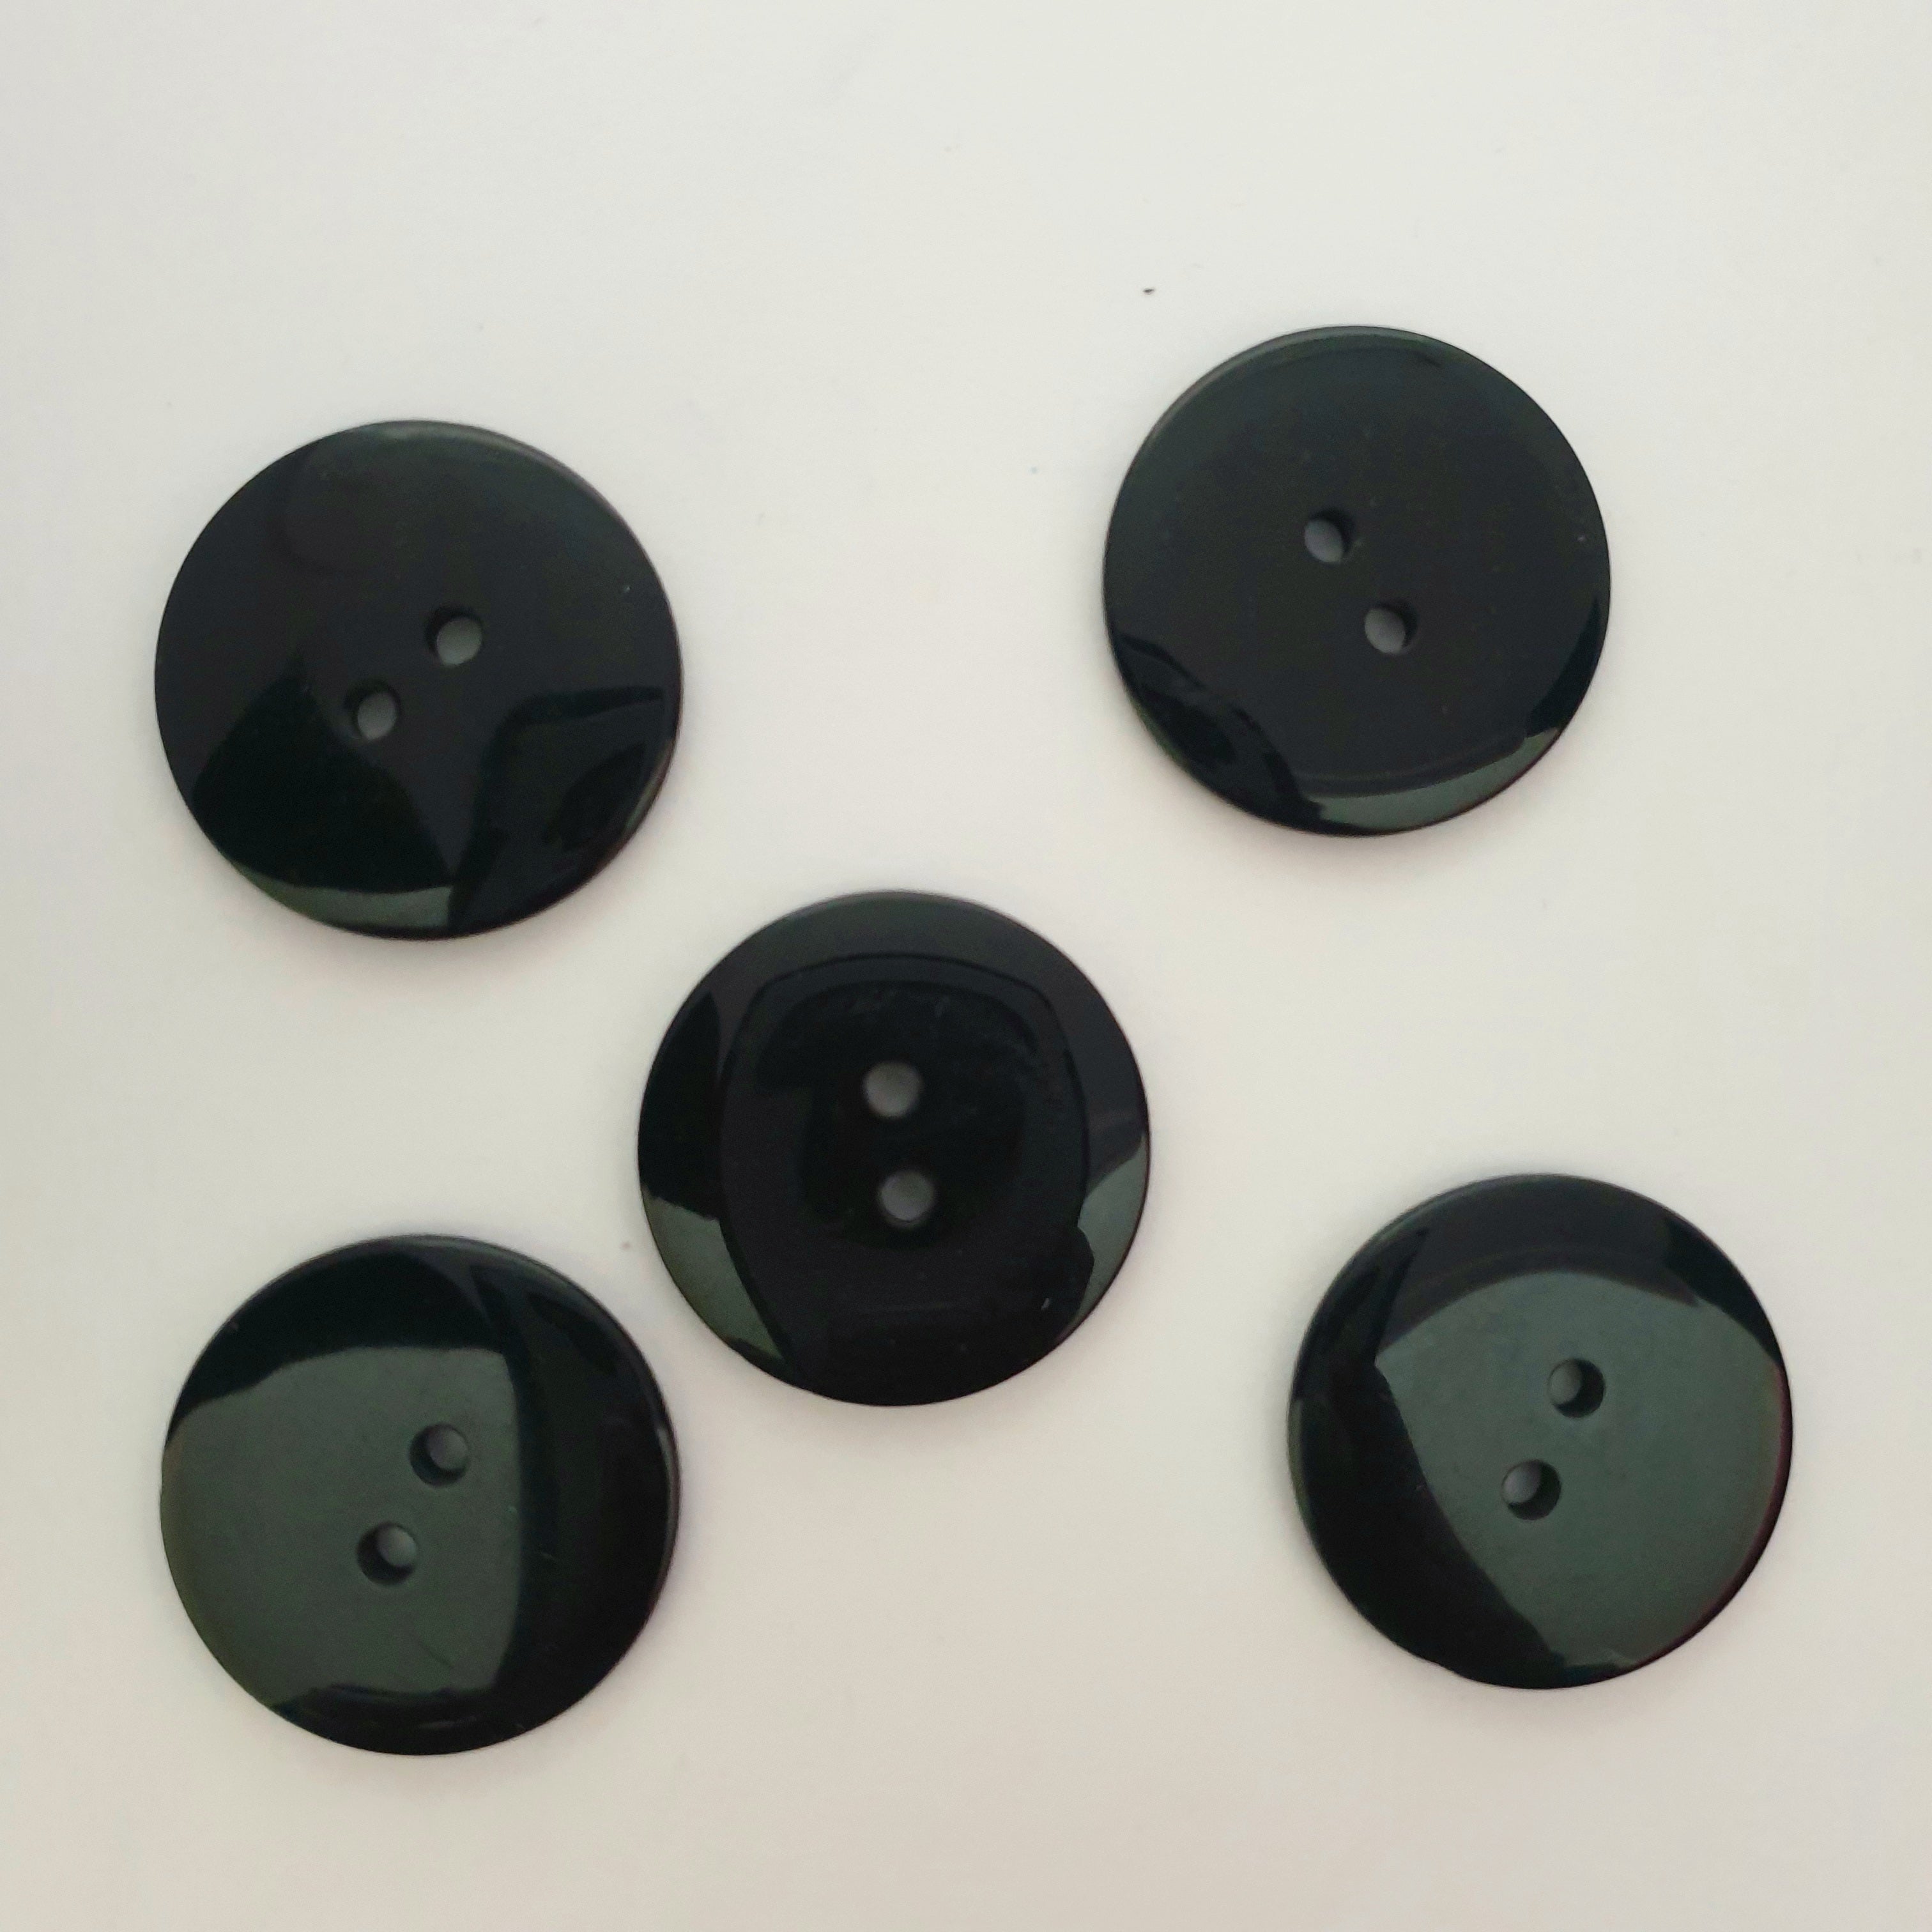 MajorCrafts 24pcs 25mm Black 2 holes Large Round Resin Sewing Buttons